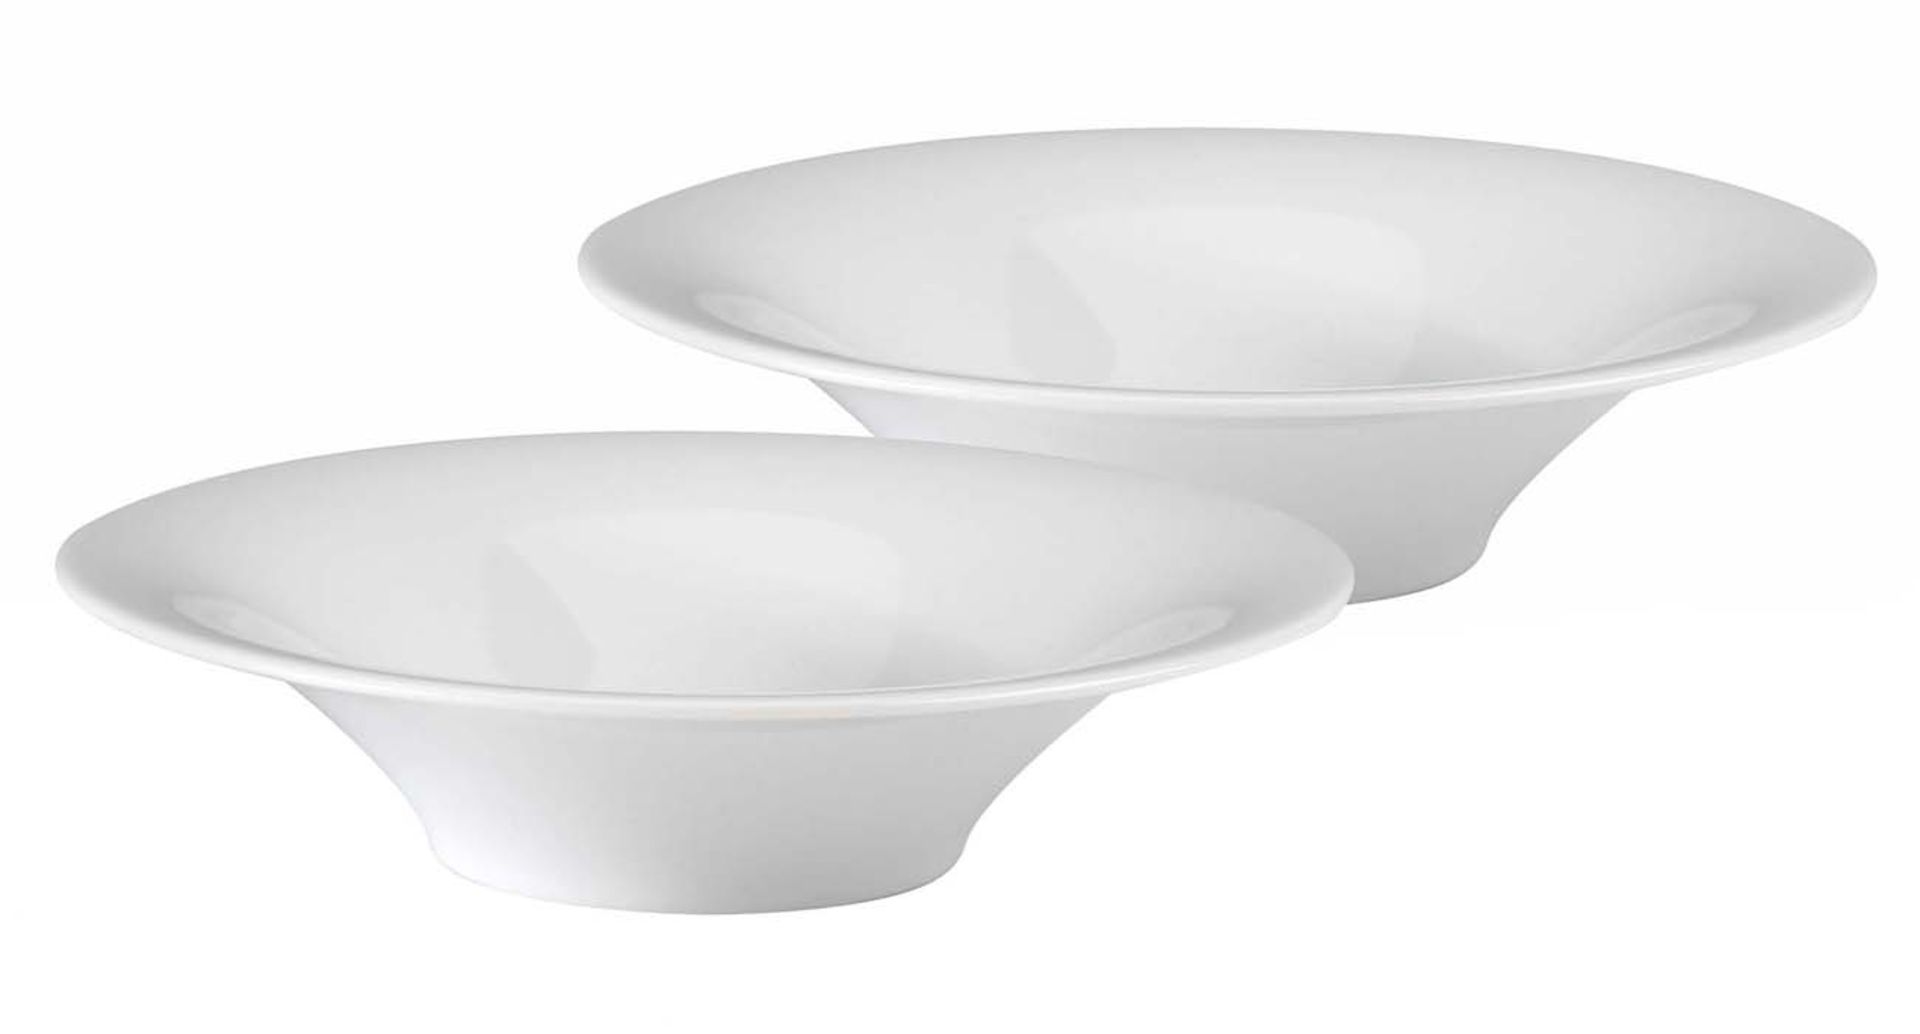 V *TRADE QTY* Brand New Alessi Ku Set of Two 21.9cm Bowls (£39.99 MAHAHome) X 7 YOUR BID PRICE TO BE